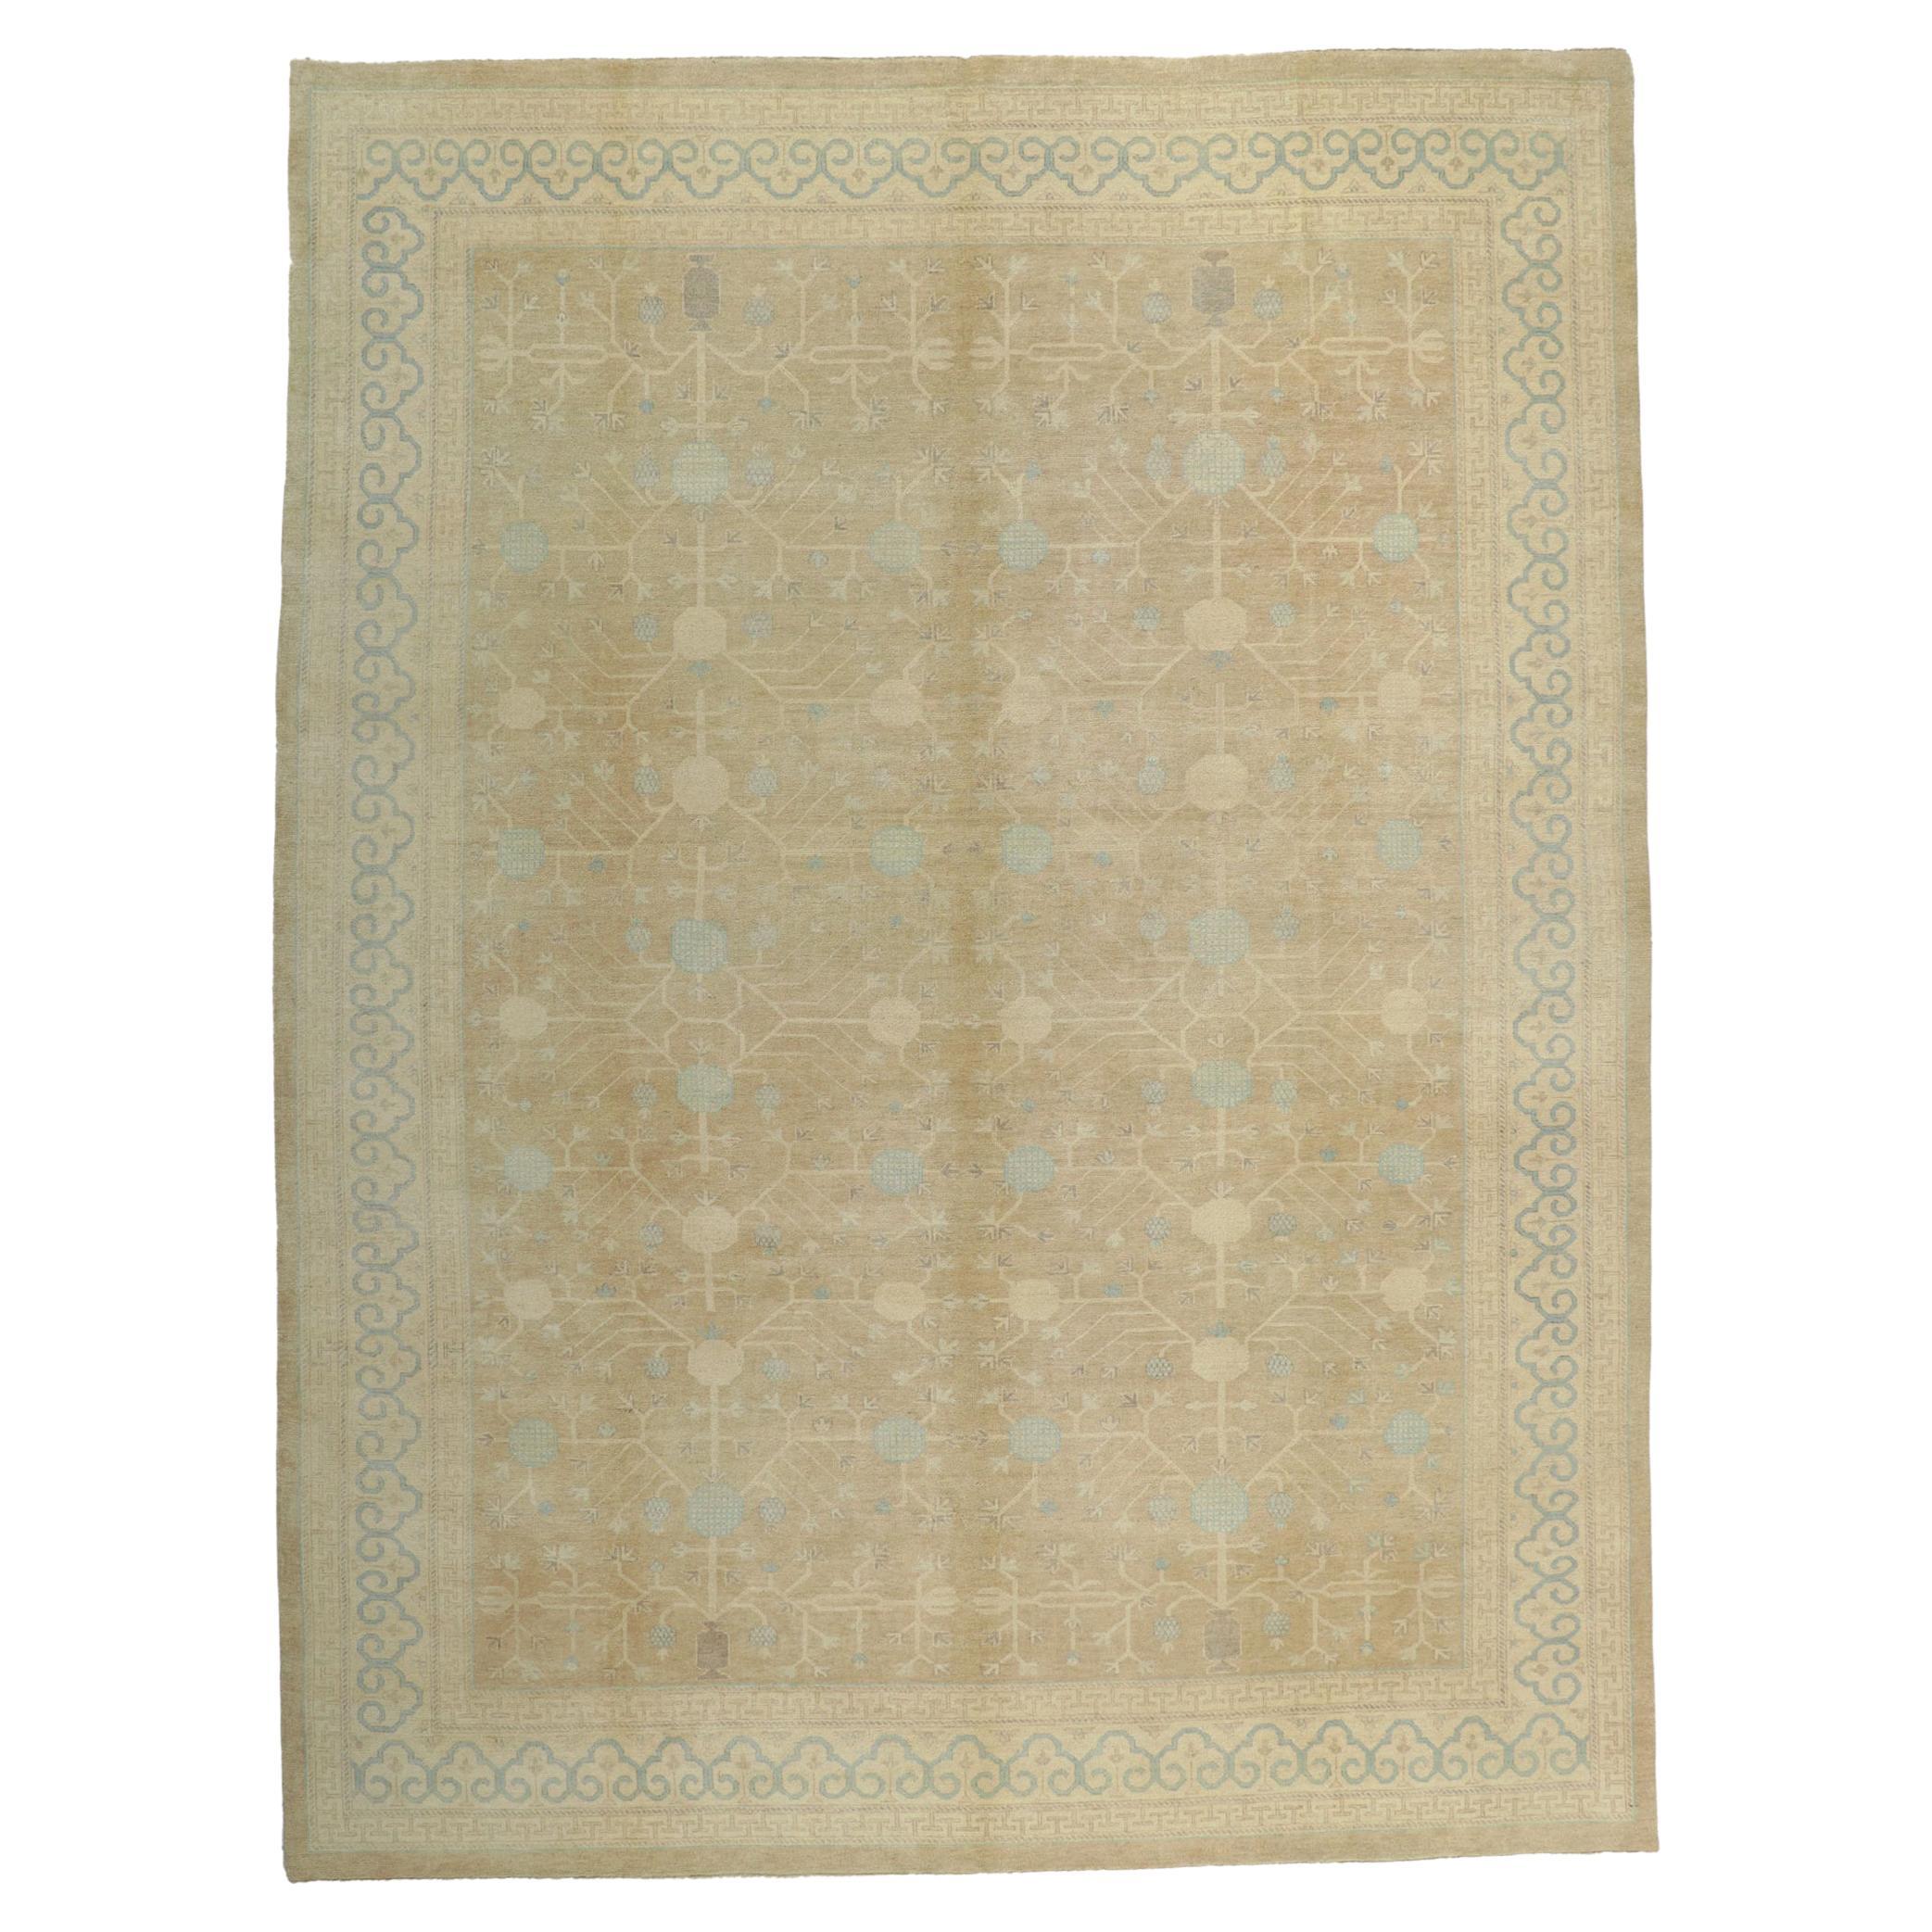 New Transitional Khotan Rug with Soft Earth-Tone Colors For Sale